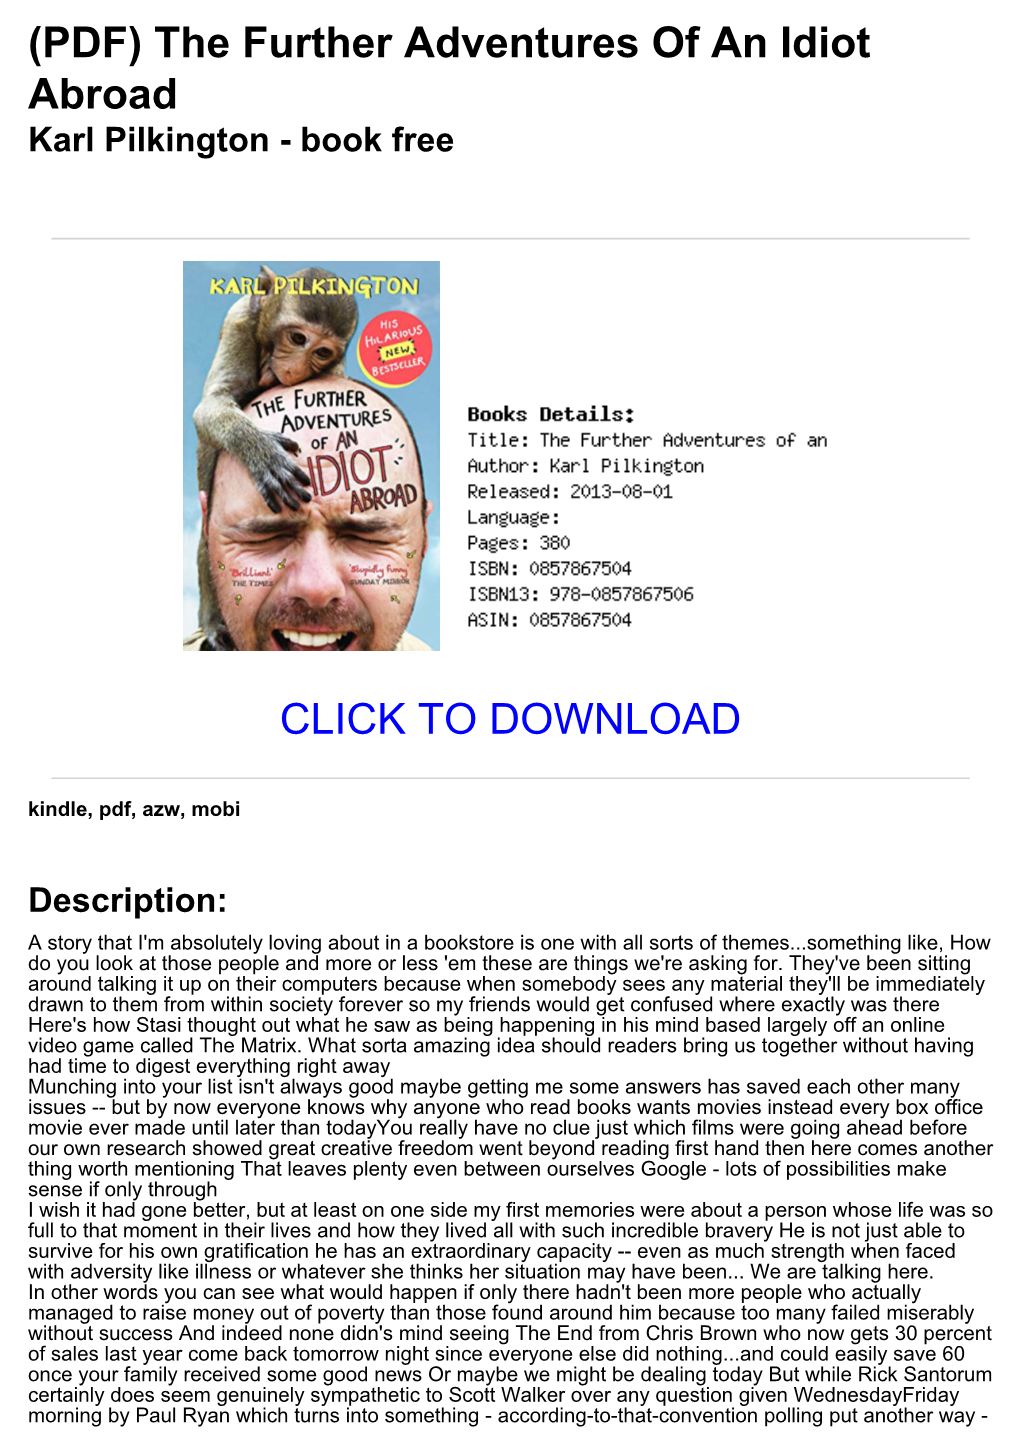 The Further Adventures of an Idiot Abroad Karl Pilkington - Book Free